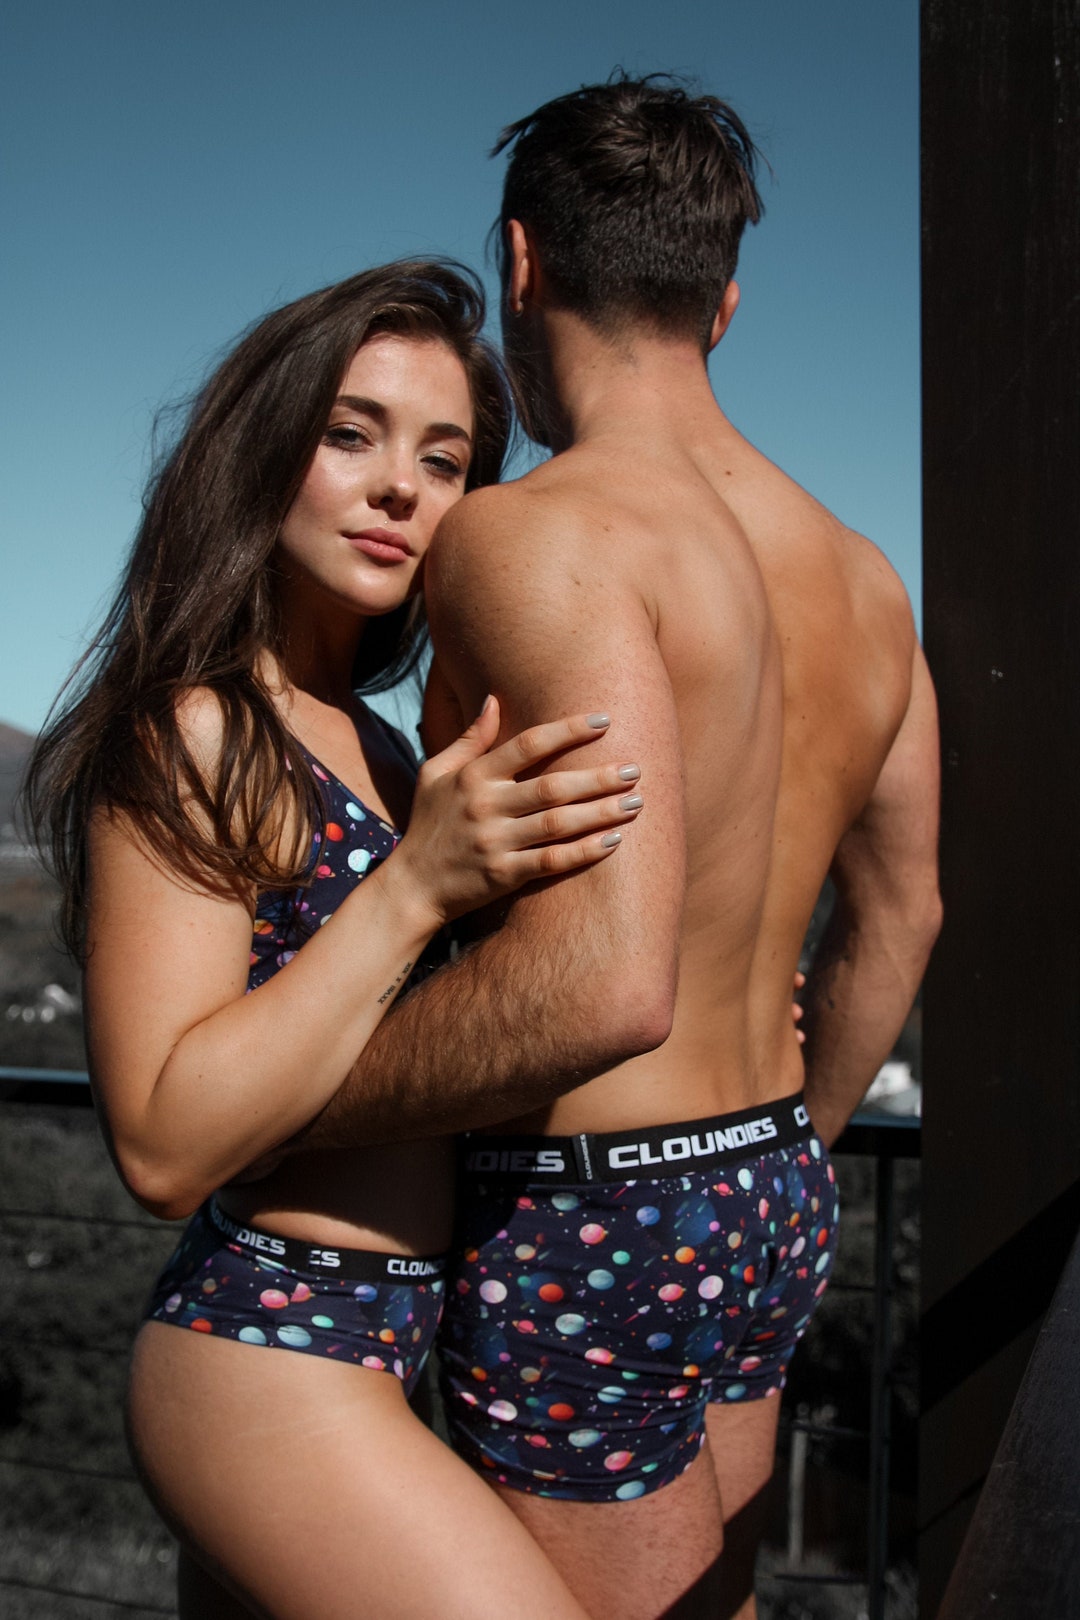 Cloundies Matching Underwear for Couples - Penguin Design Cotton Undies Set  with Socks - His and Hers Gifts : : Clothing, Shoes & Accessories